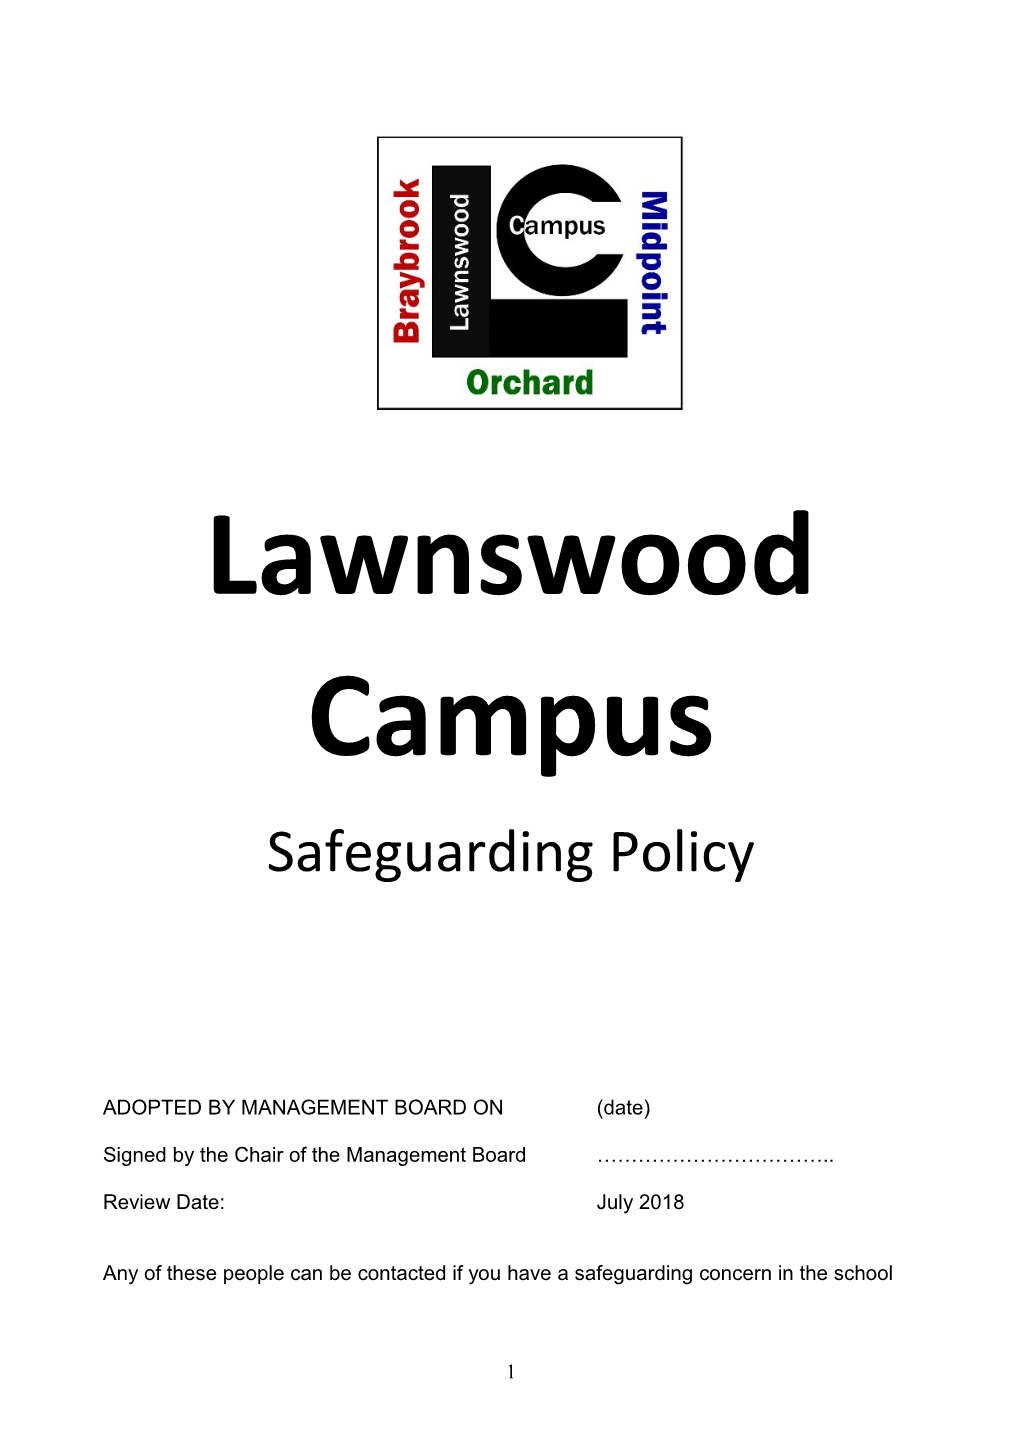 Lawnswood Campus